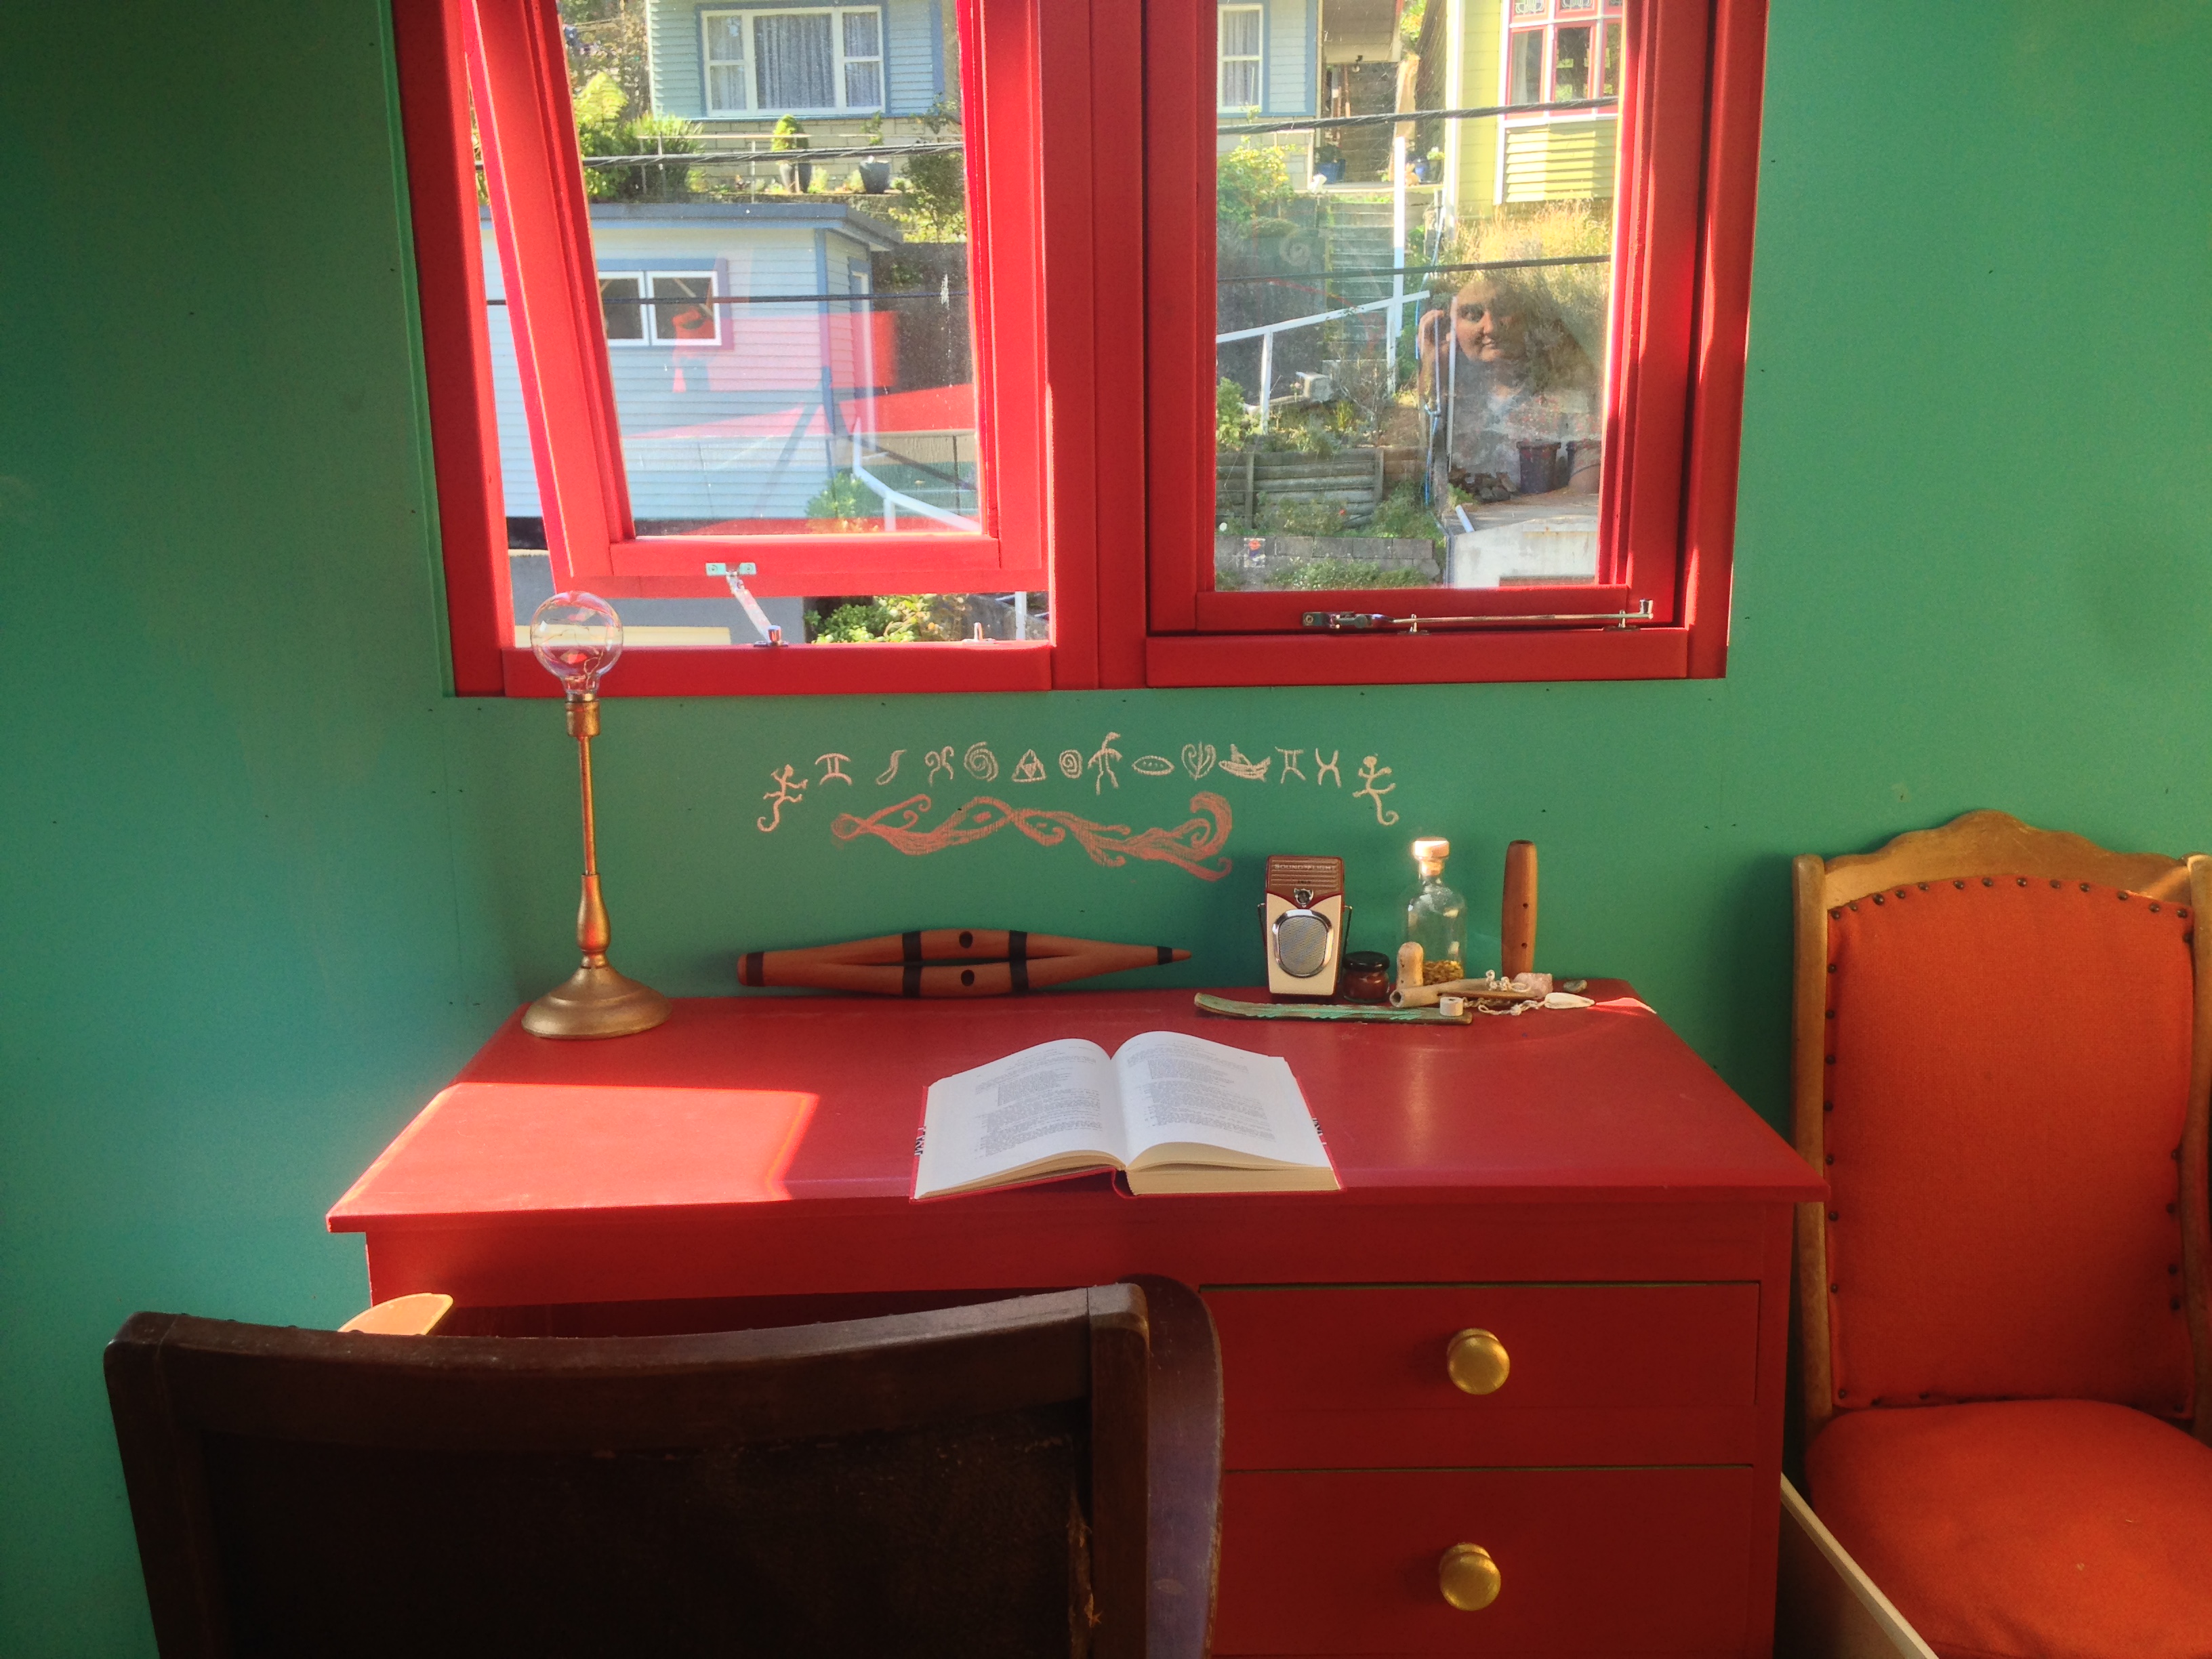 The desk in Ruby’s studio, as well as her putorino, taonga, and sketches of Kai Tahu cave art.